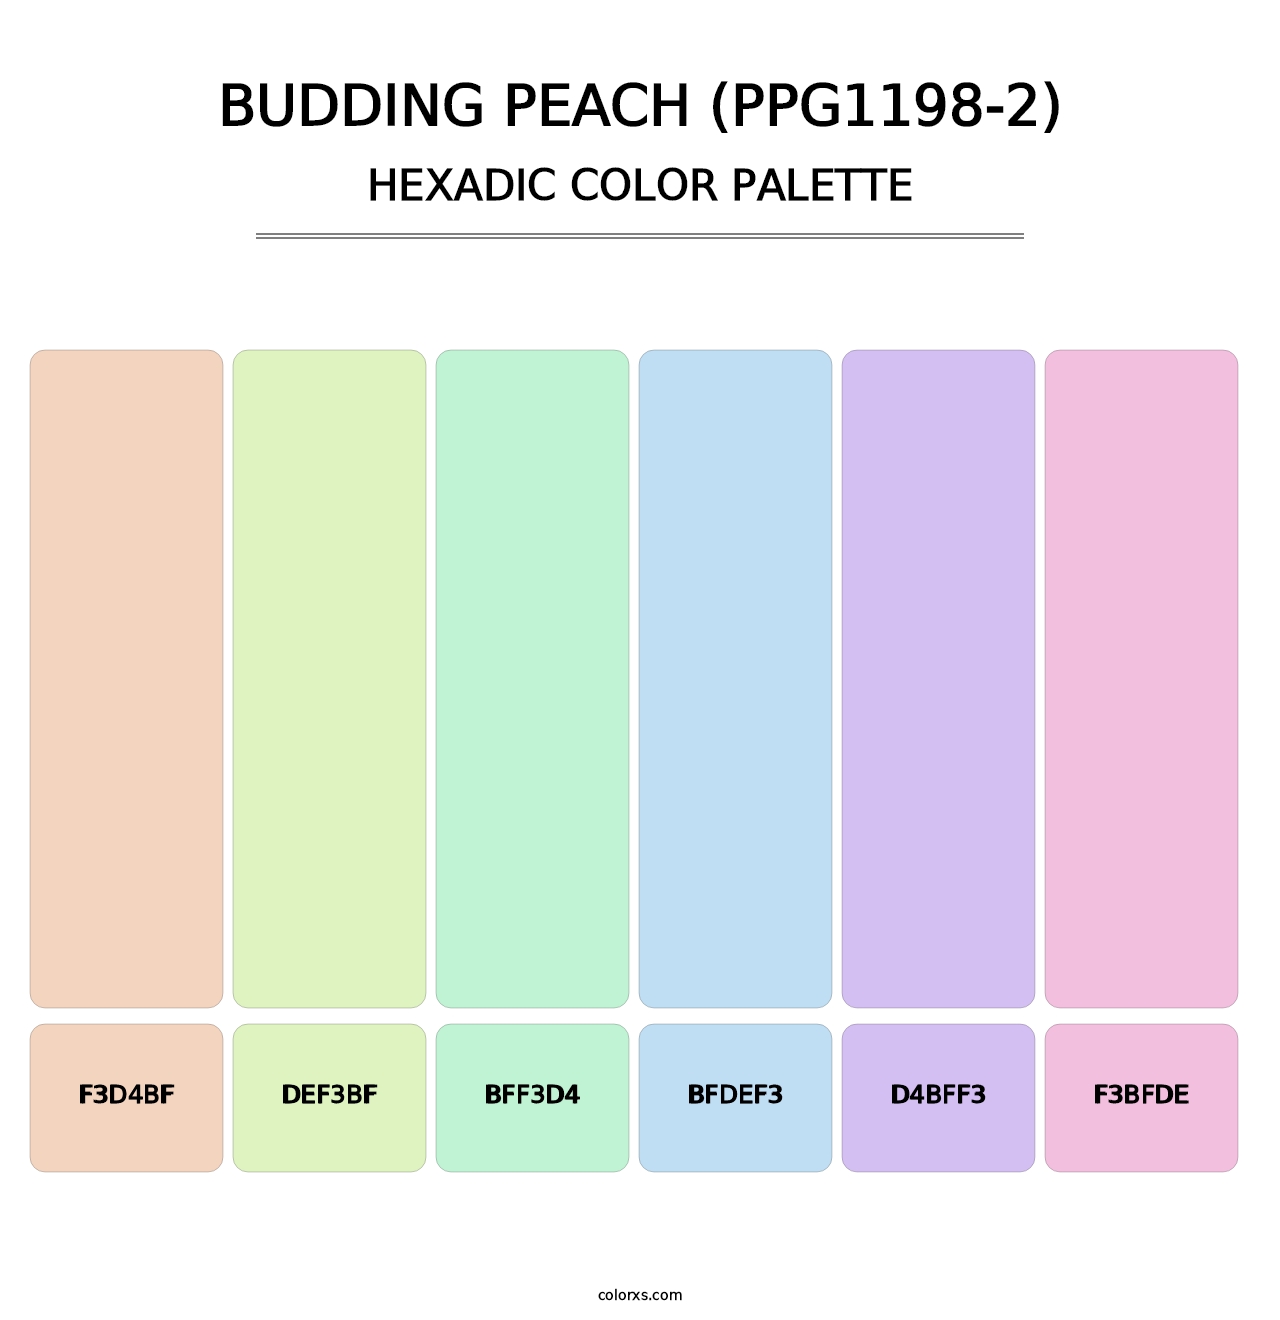 Budding Peach (PPG1198-2) - Hexadic Color Palette